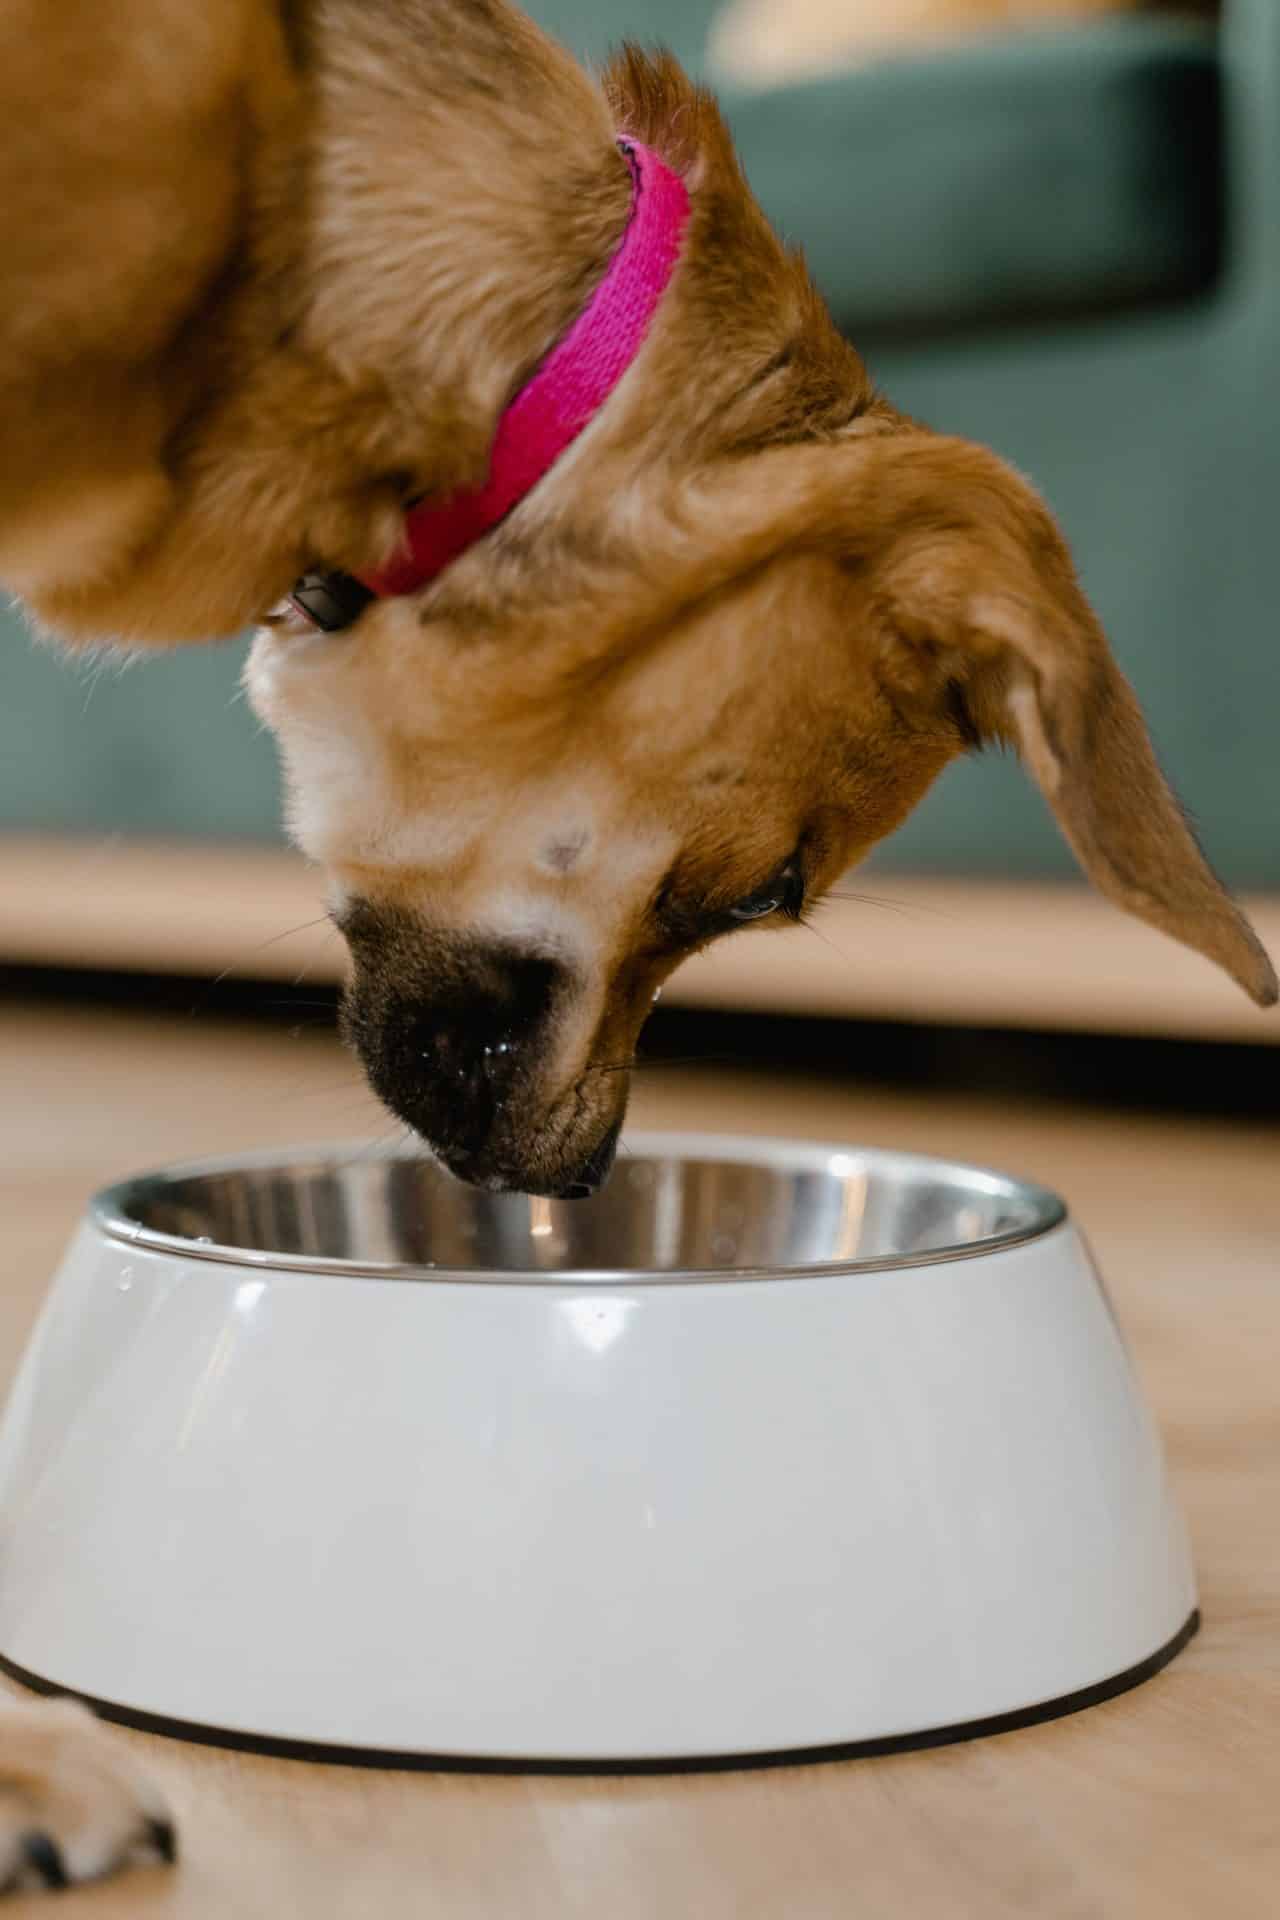 The do's and don'ts of cooking for pets